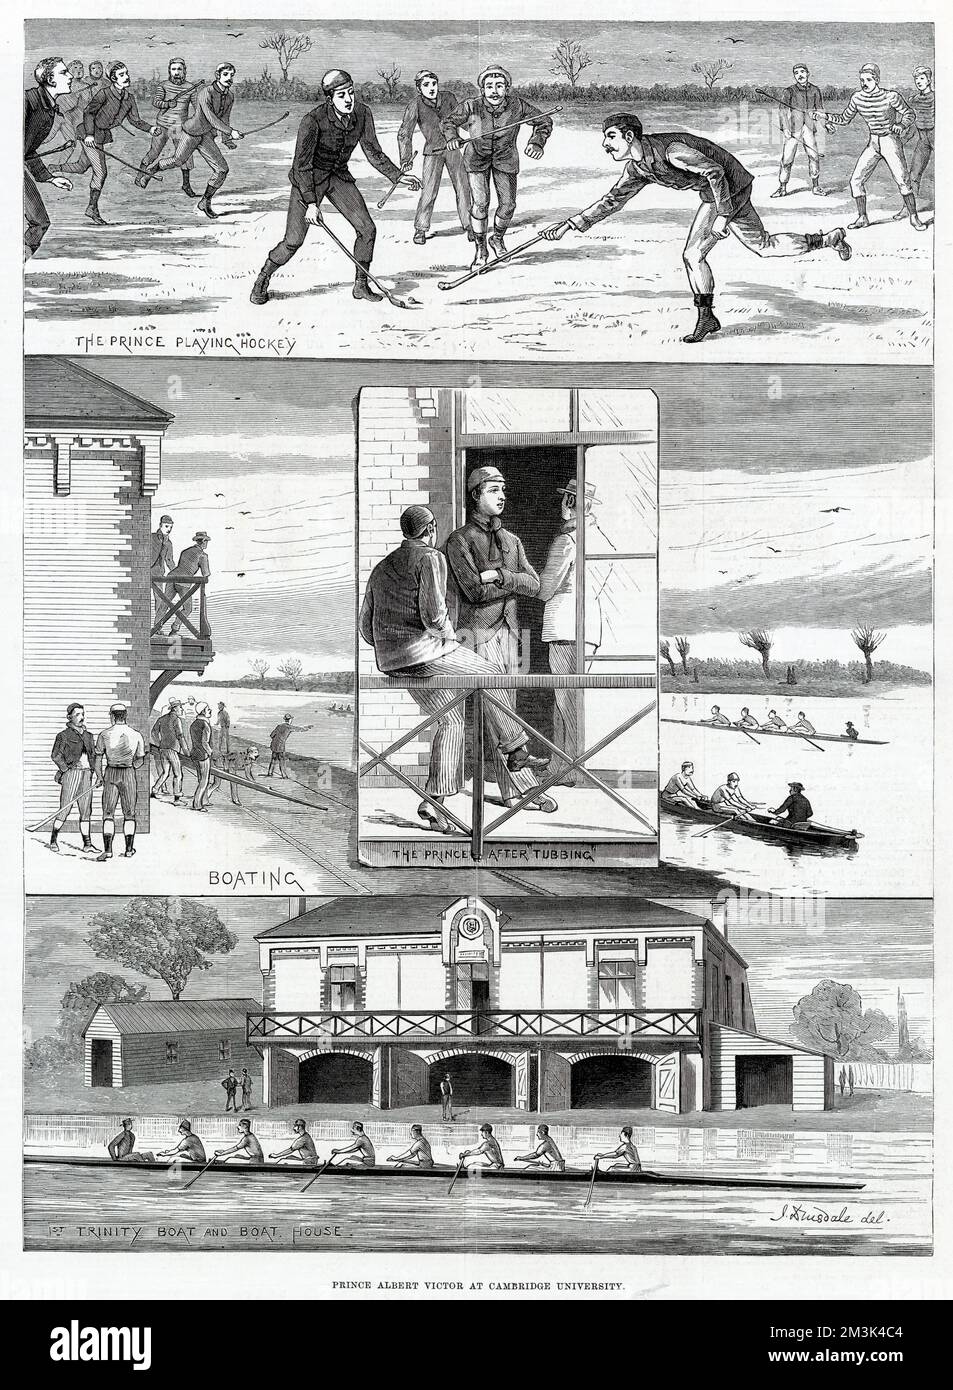 Series of sketches showing Prince Albert Victor, Duke of Clarence (1864 - 1892), involved in a series of sporting activities while at Cambridge University. The eldest son of Edward, Prince of Wales he was heir to the throne until his untimely death from pneumonia in January 1892. Stock Photo